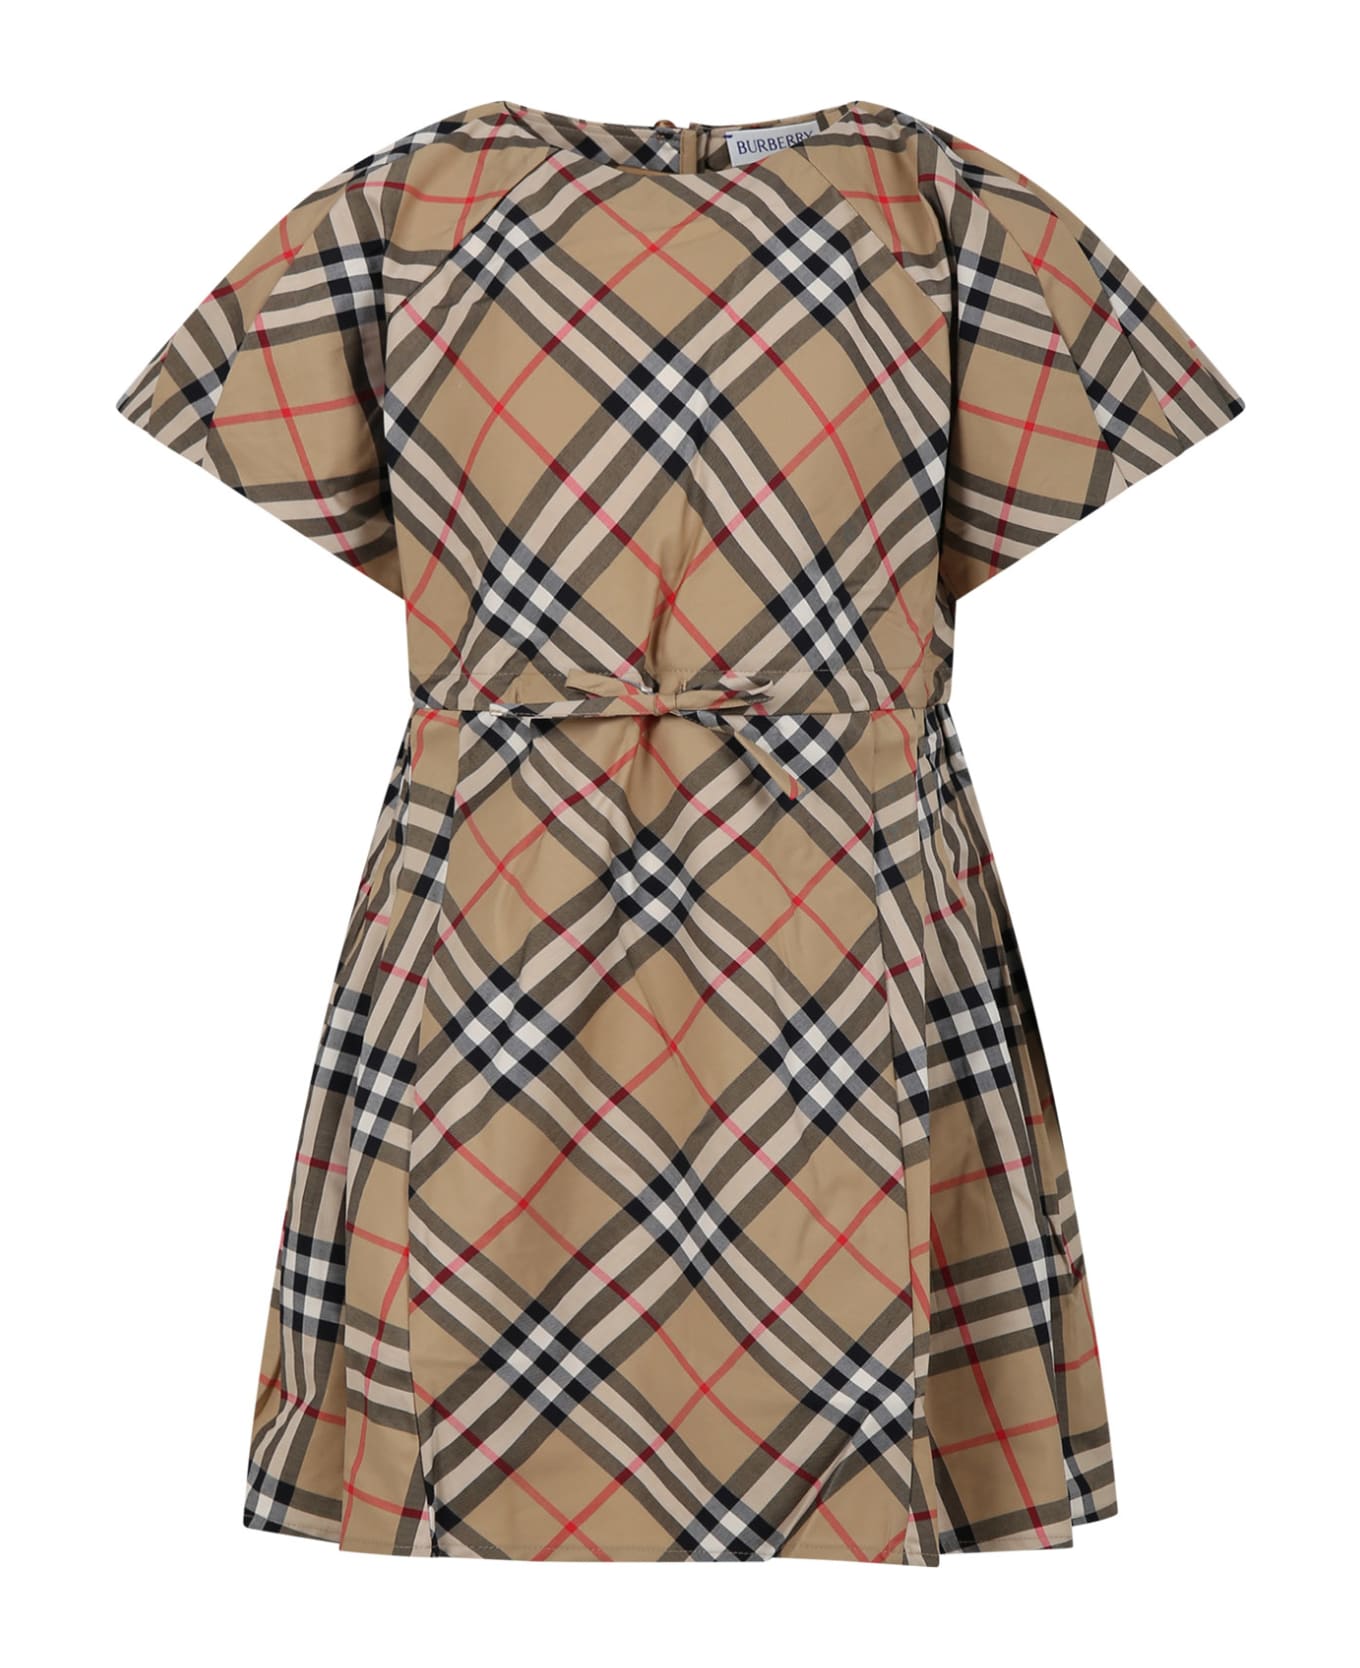 Burberry Beige Dress For Girl With Iconic All-over Vintage Check - Beige